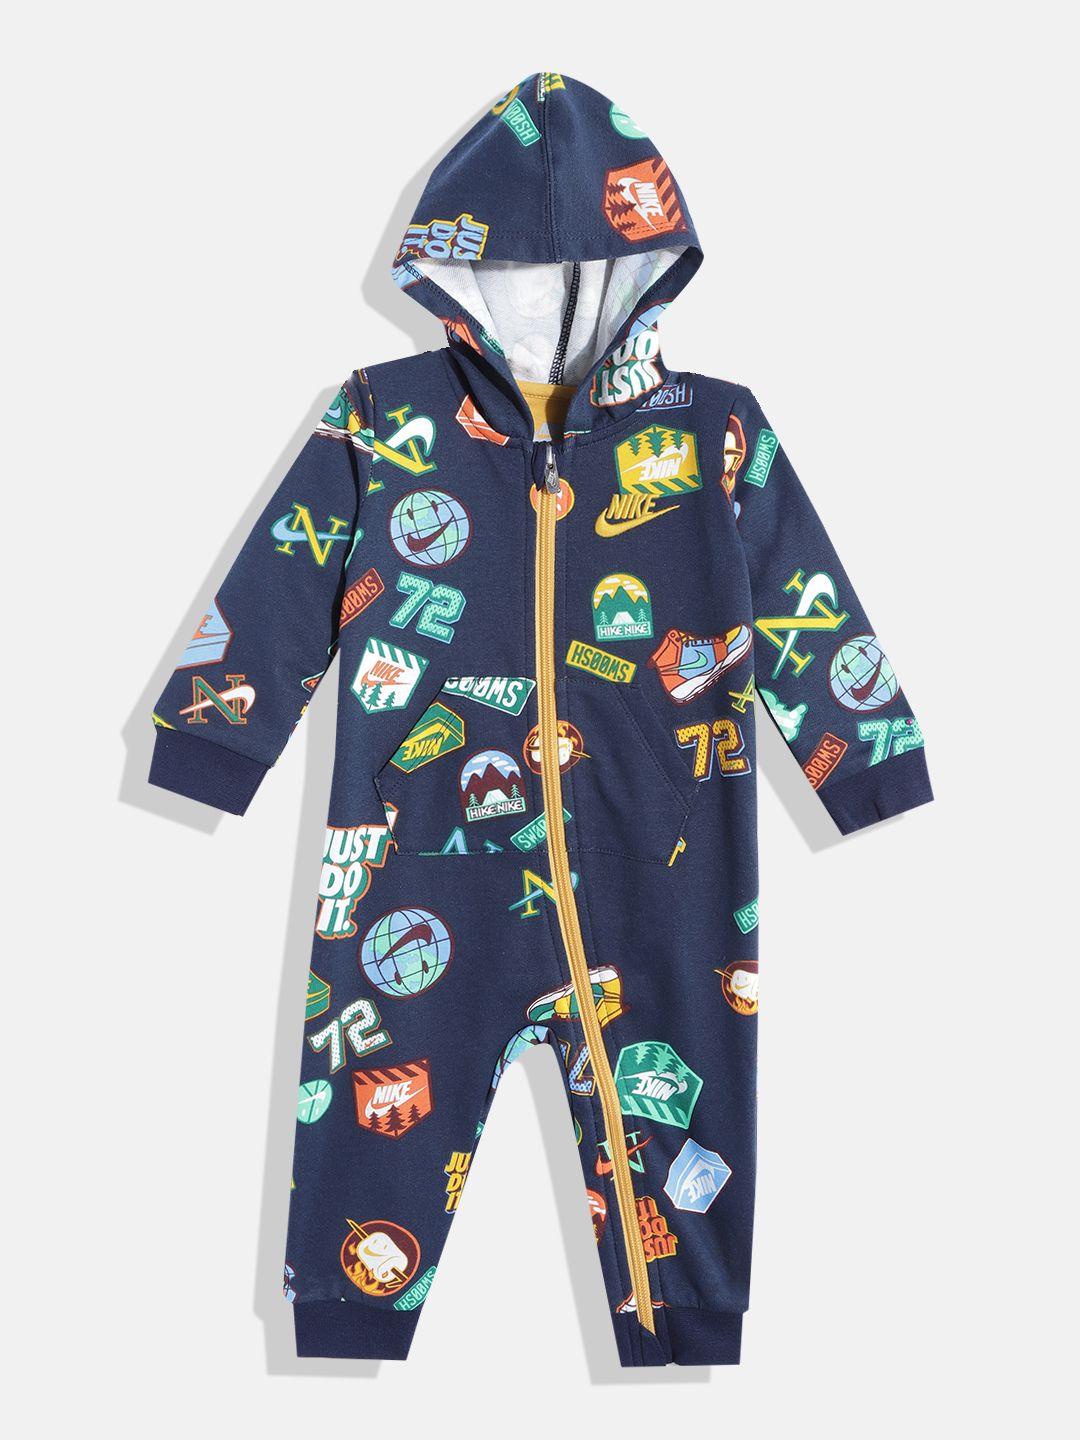 nike infant boys navy blue & yellow printed great outdoors rompers